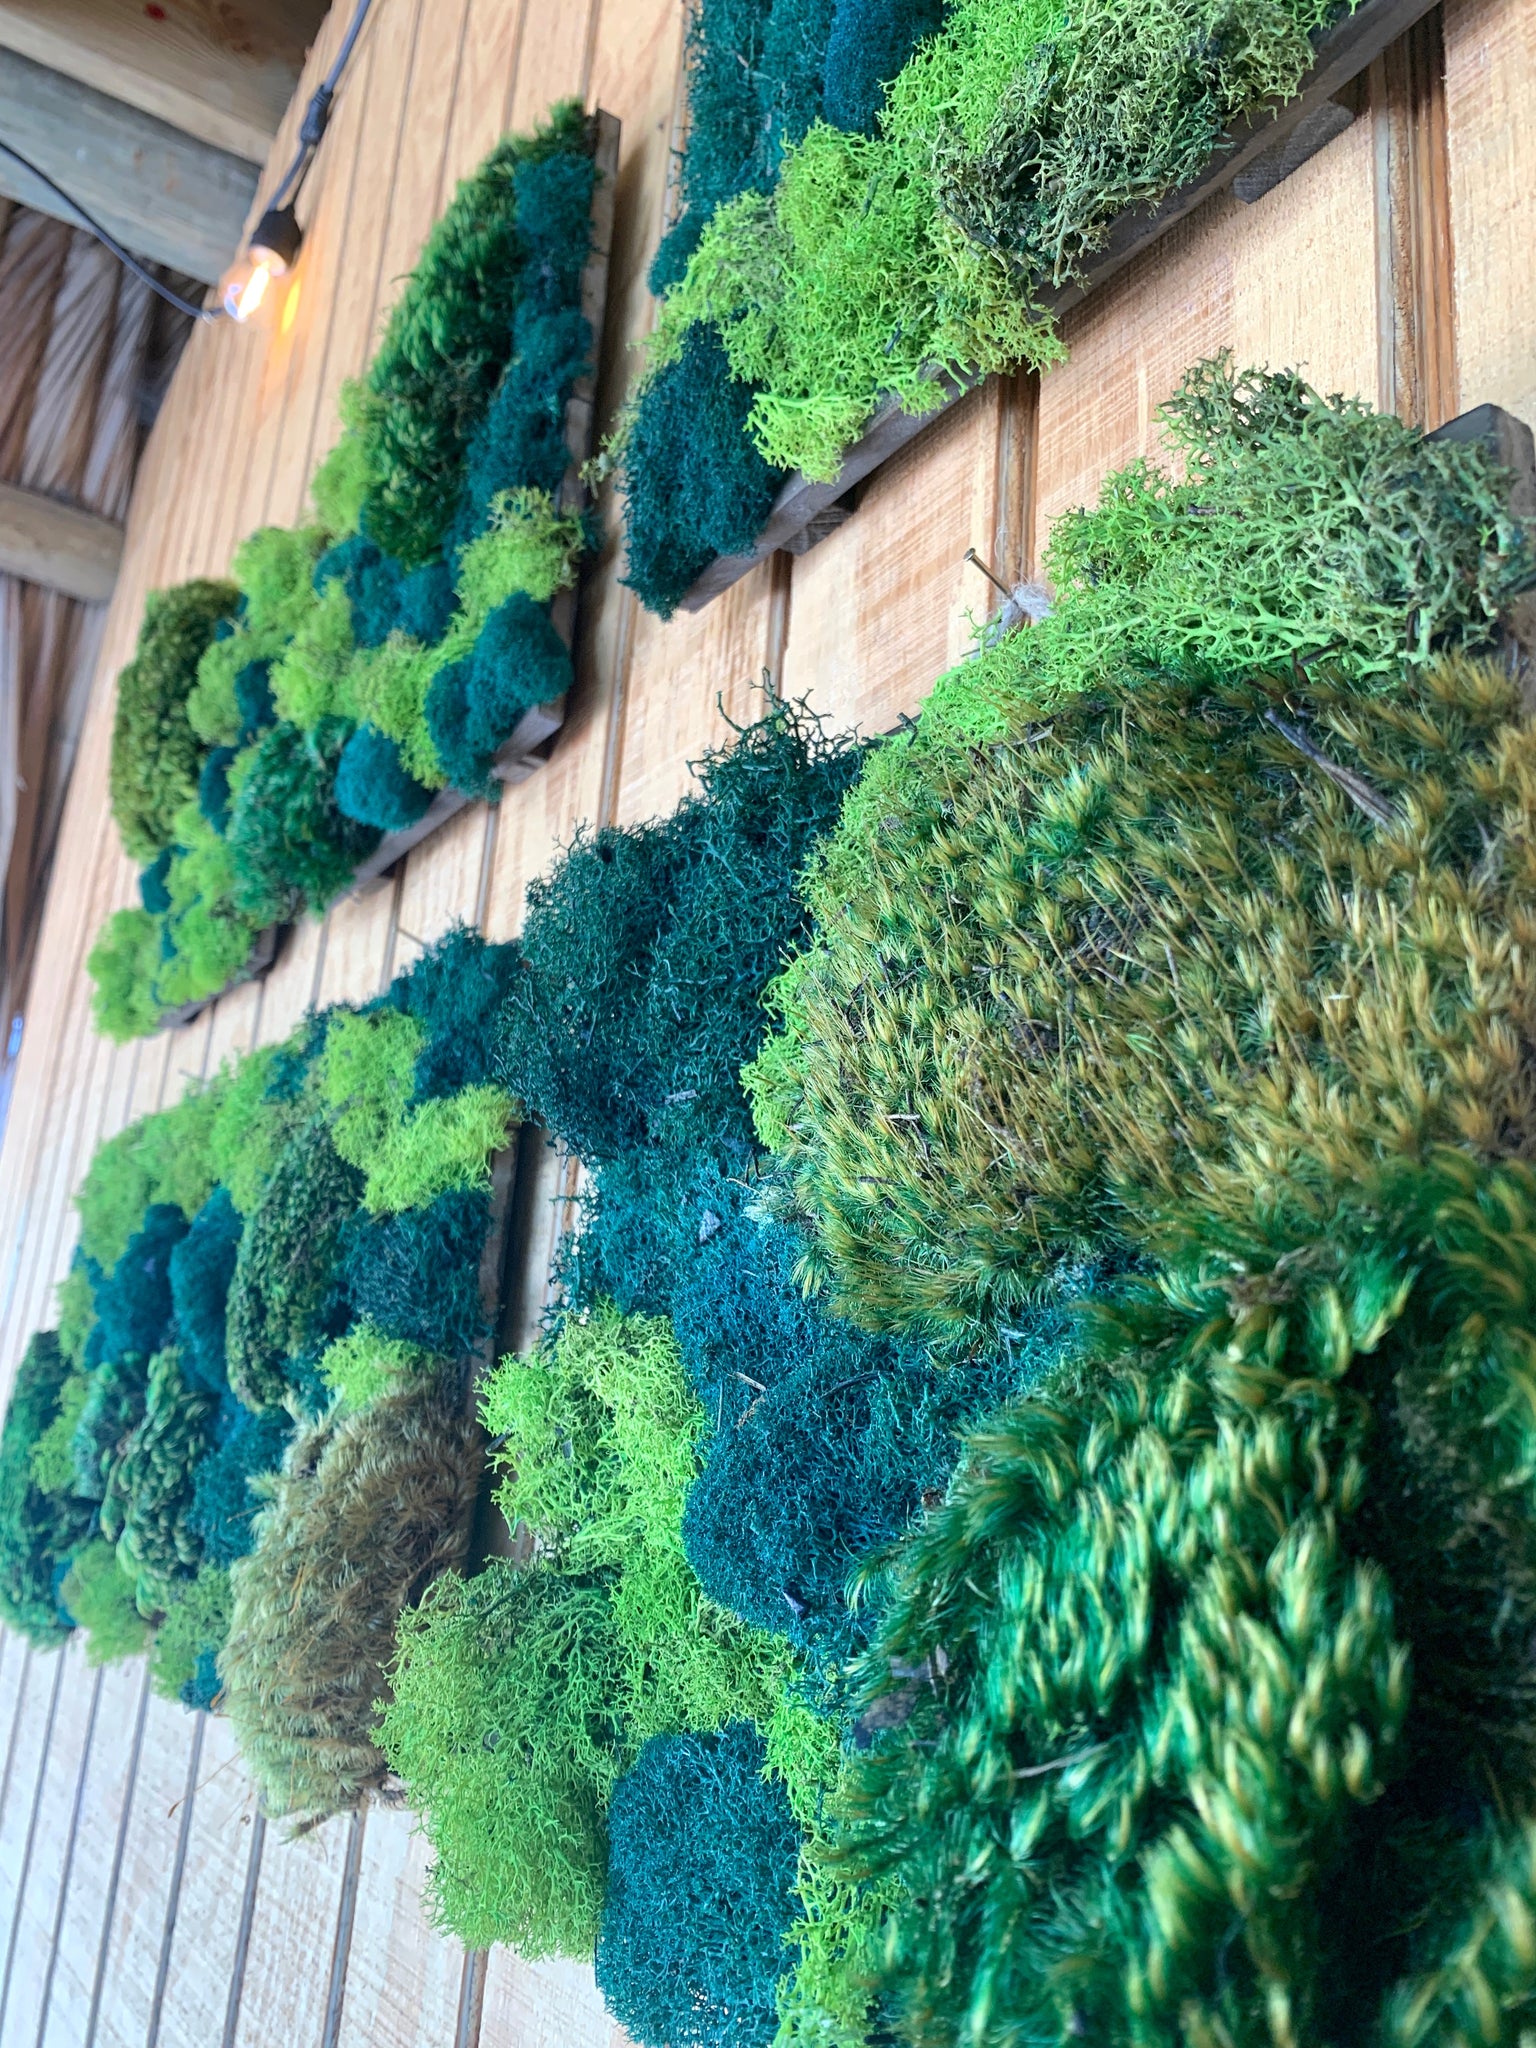 Moss Wall Panel - Preserved Moss for Indoor Decorative Use